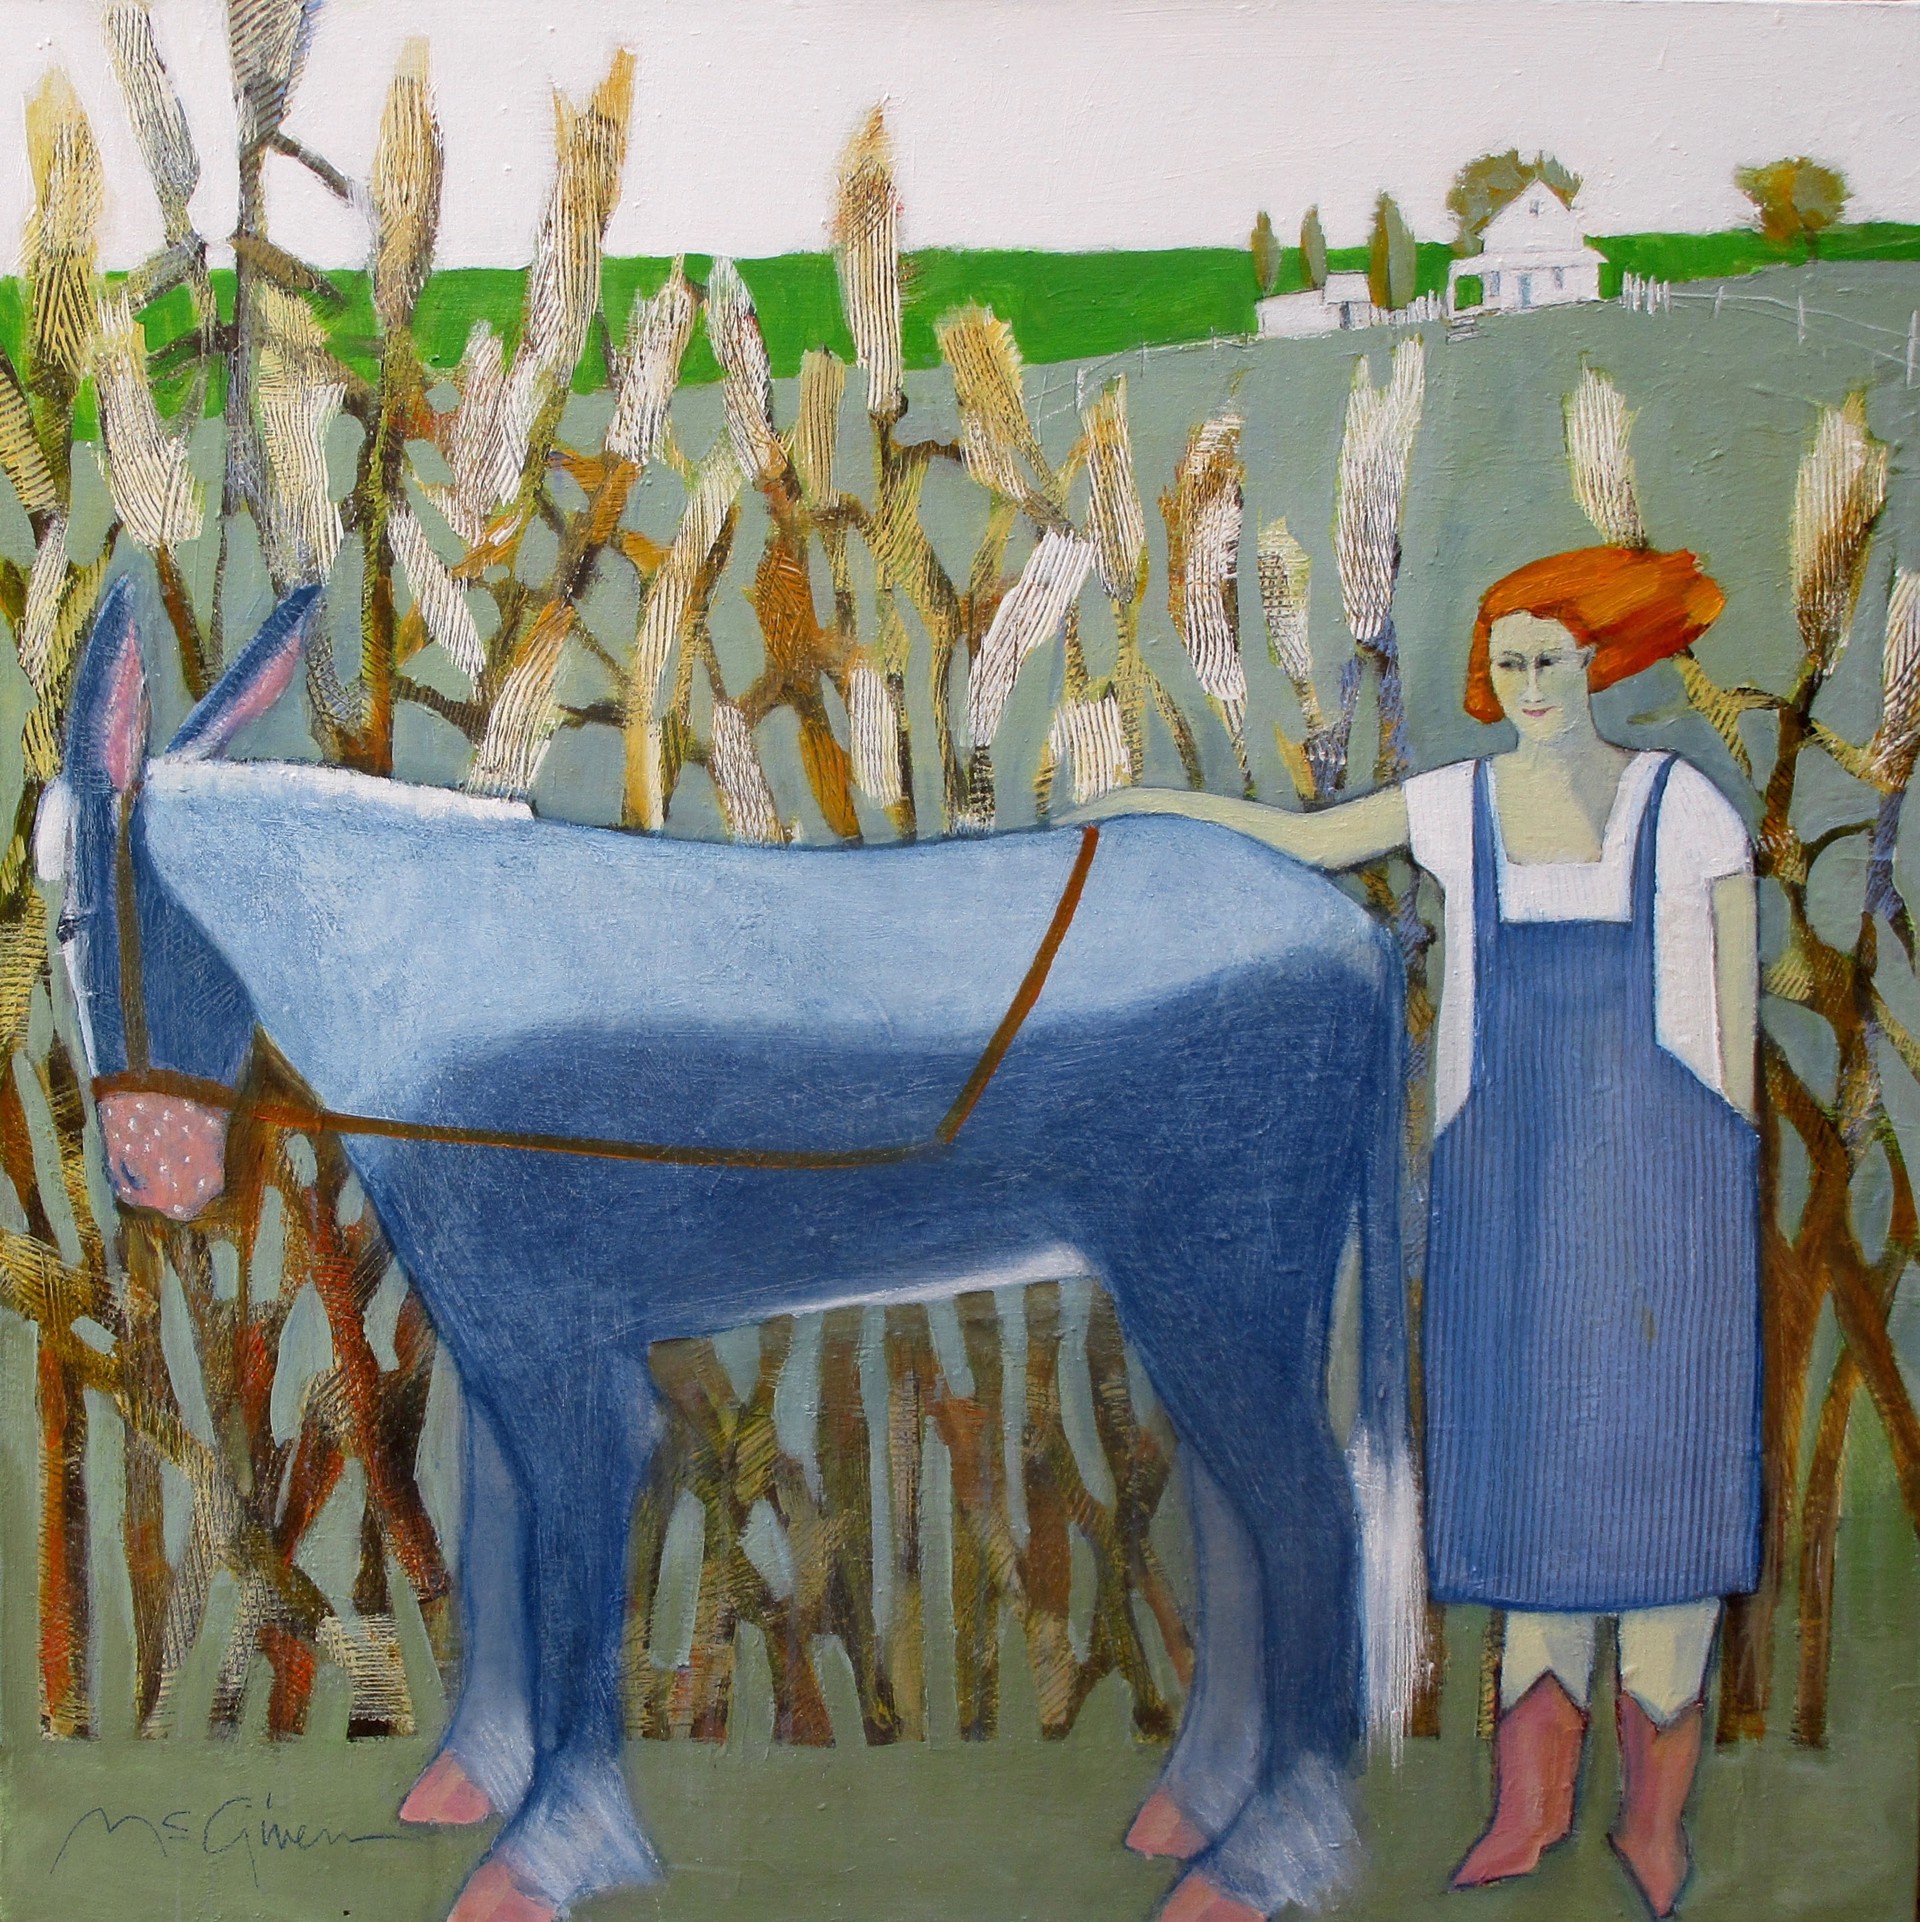 Katie's Mule by Peggy McGivern